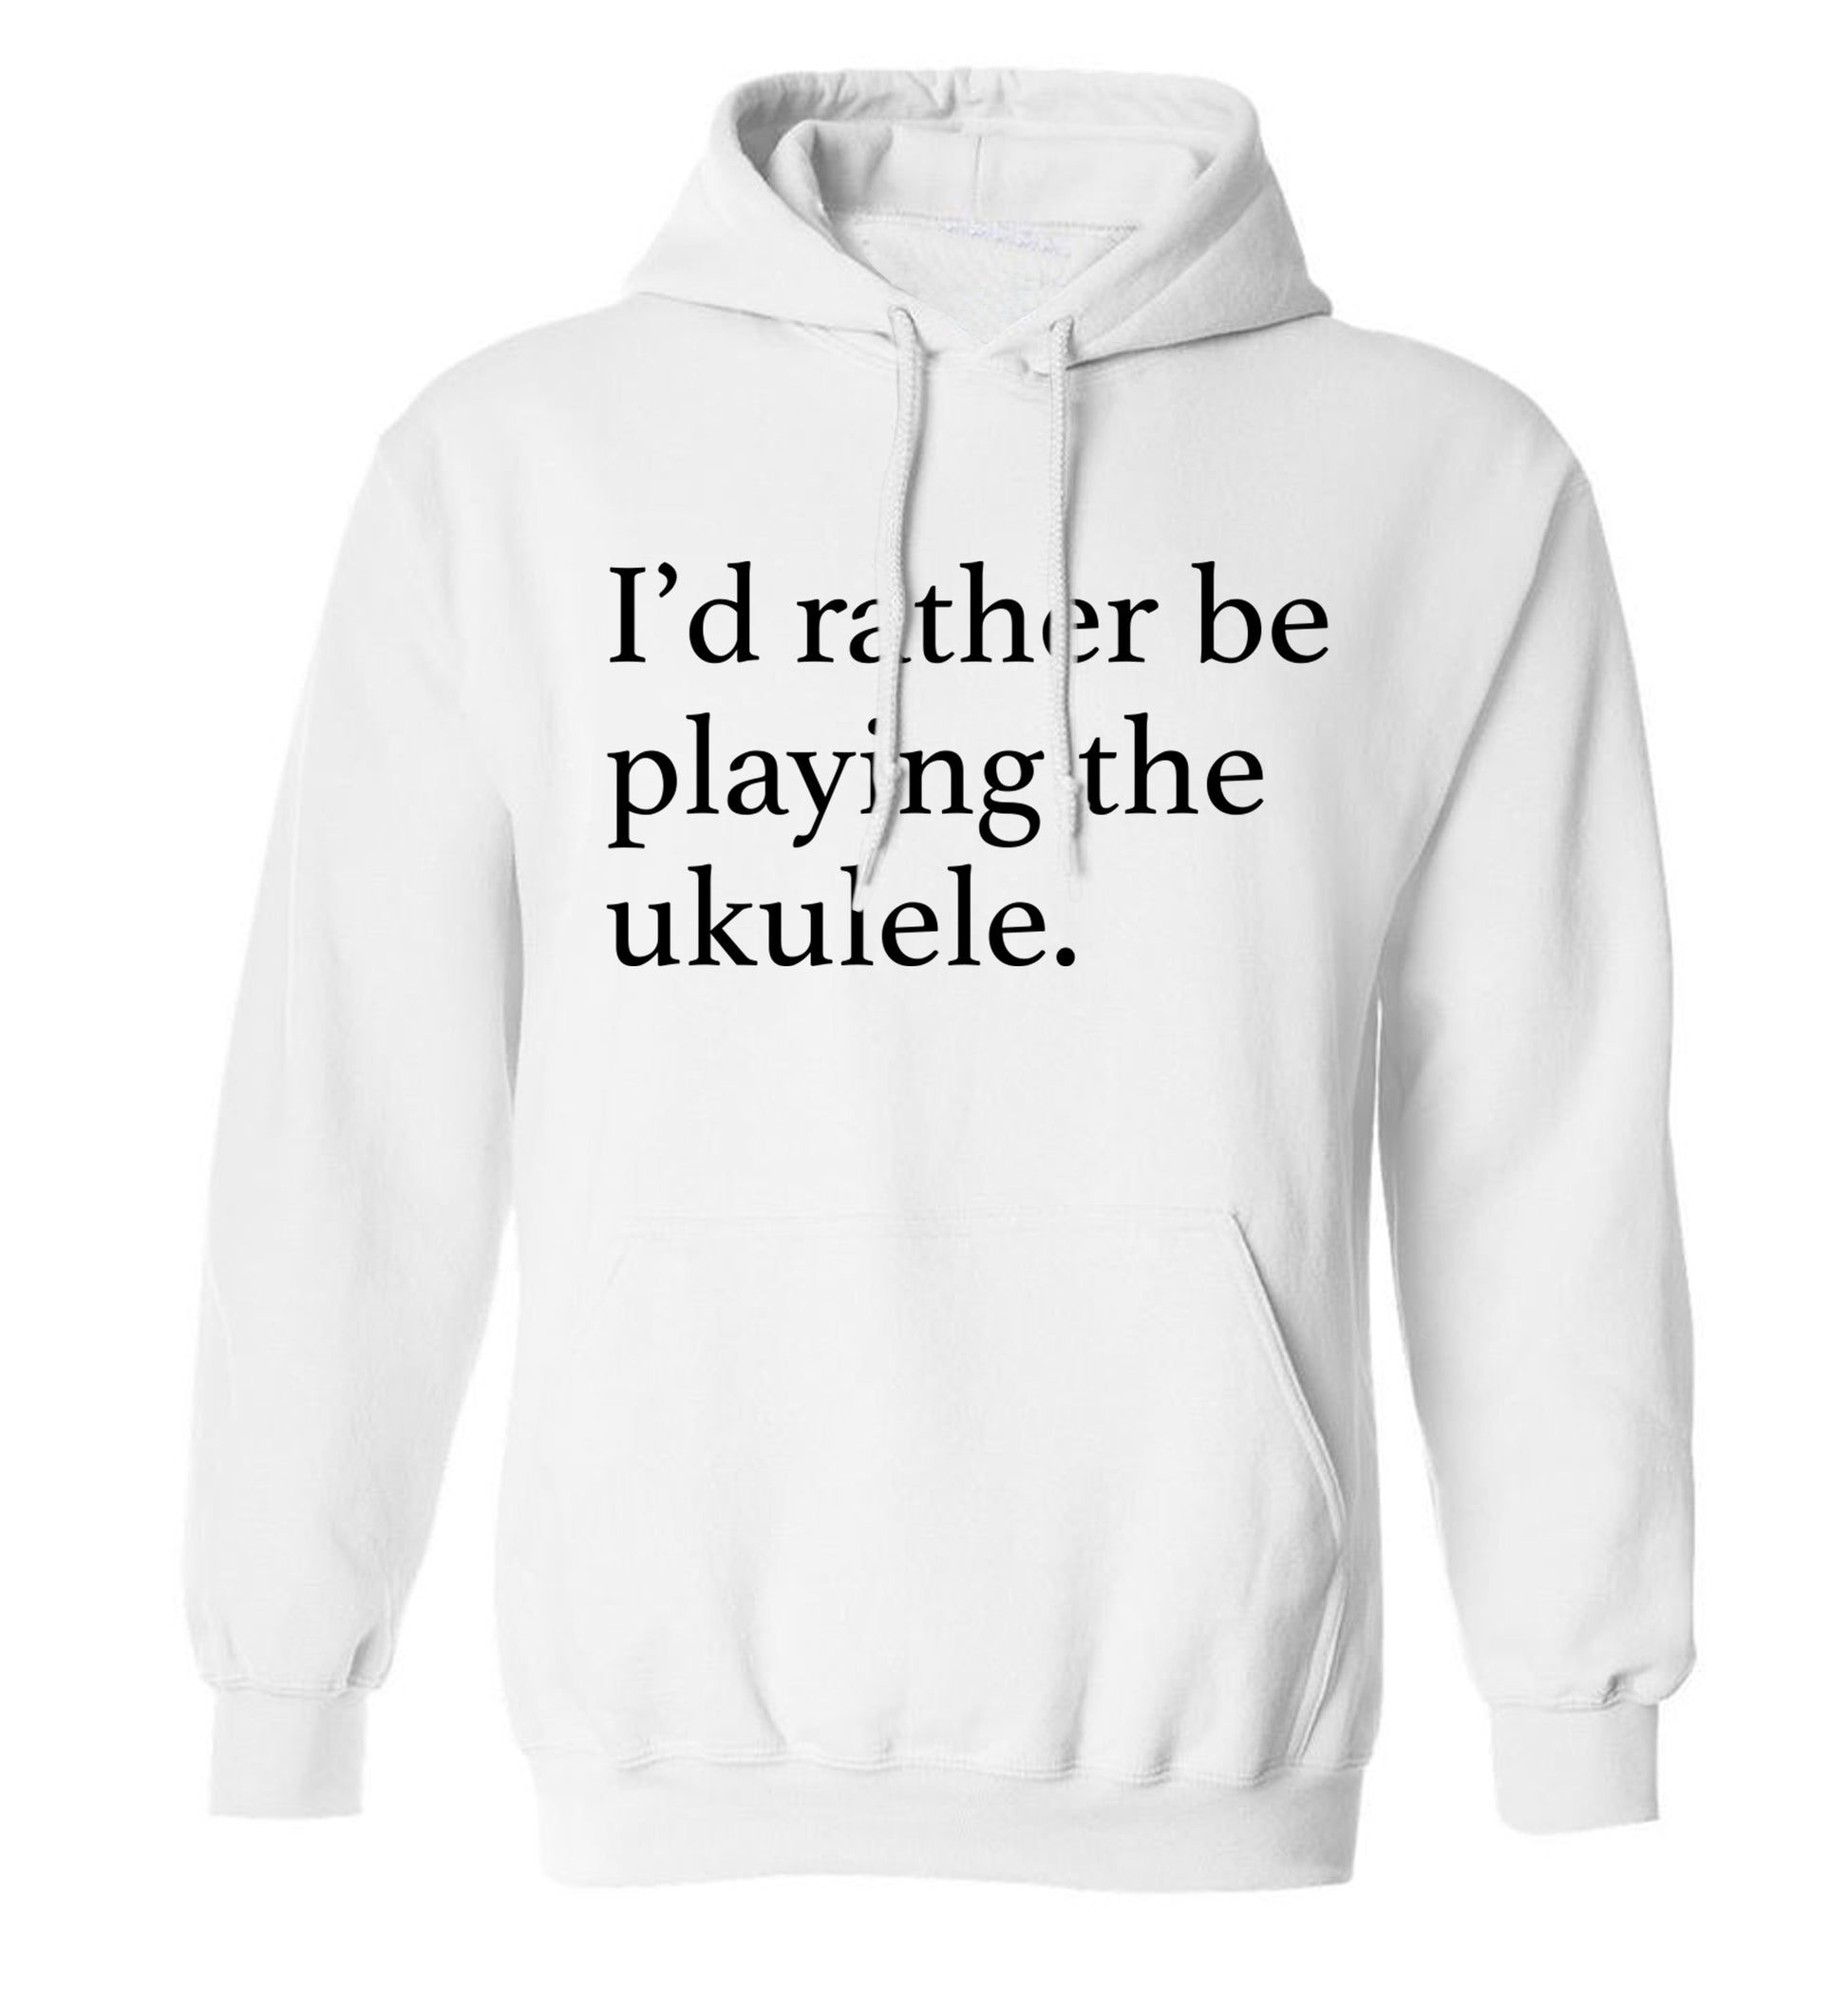 I'd rather by playing the ukulele adults unisex white hoodie 2XL